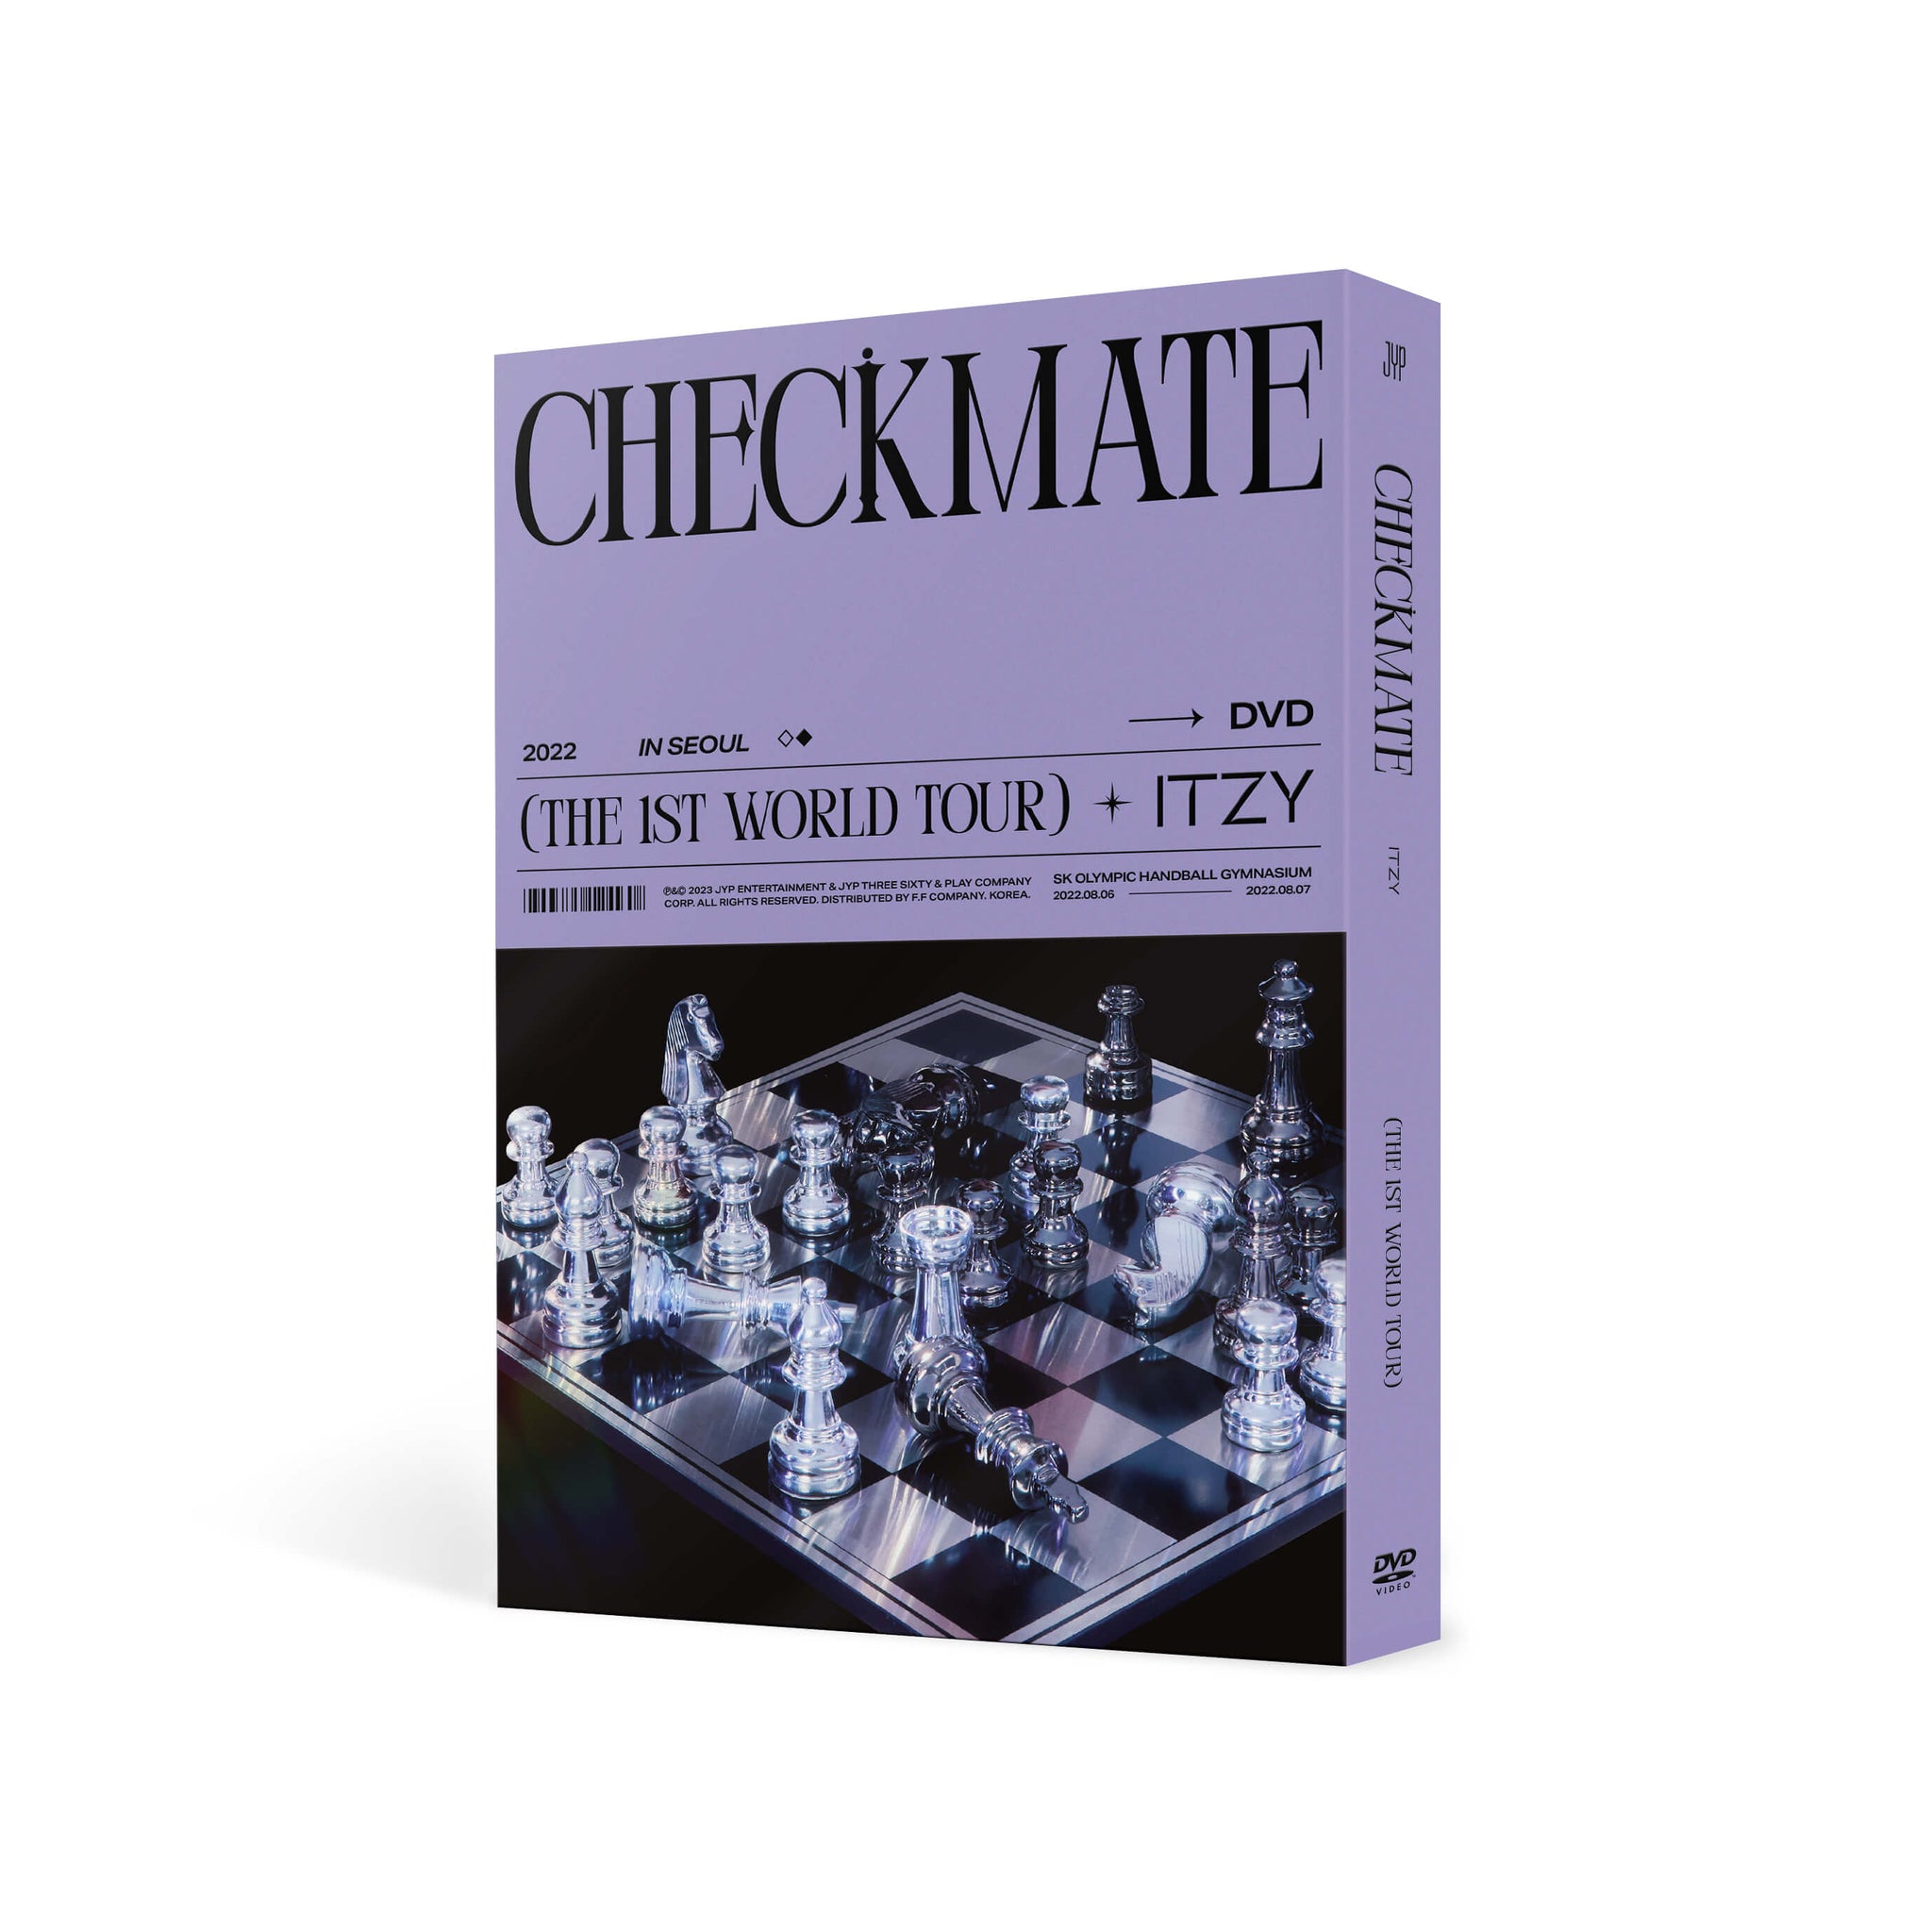 2022 ITZY THE 1ST WORLD TOUR CHECKMATE in SEOUL DVD